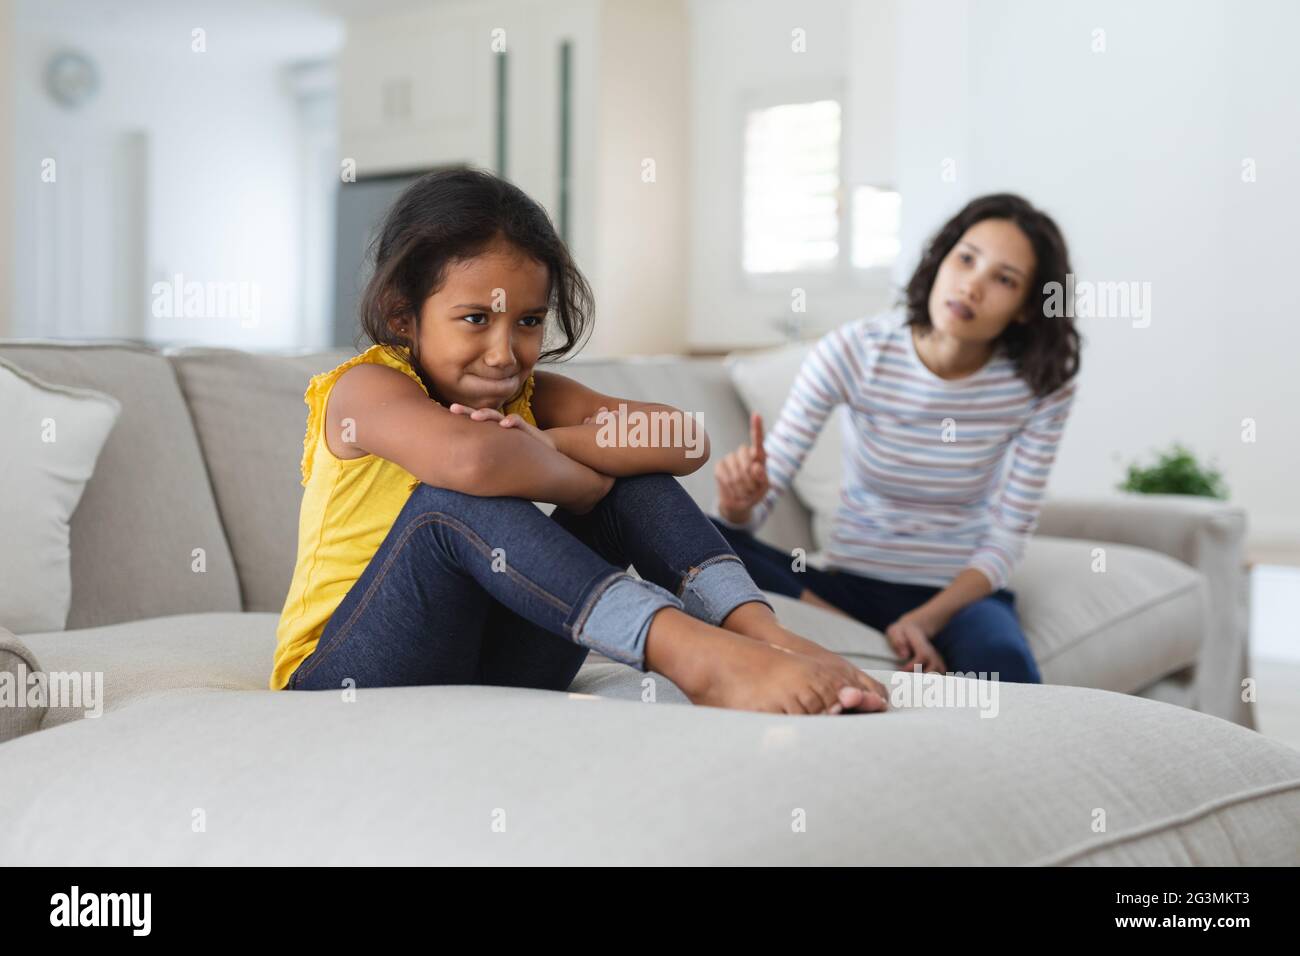 Sad hispanic daughter sitting on couch being told off by mother Stock Photo